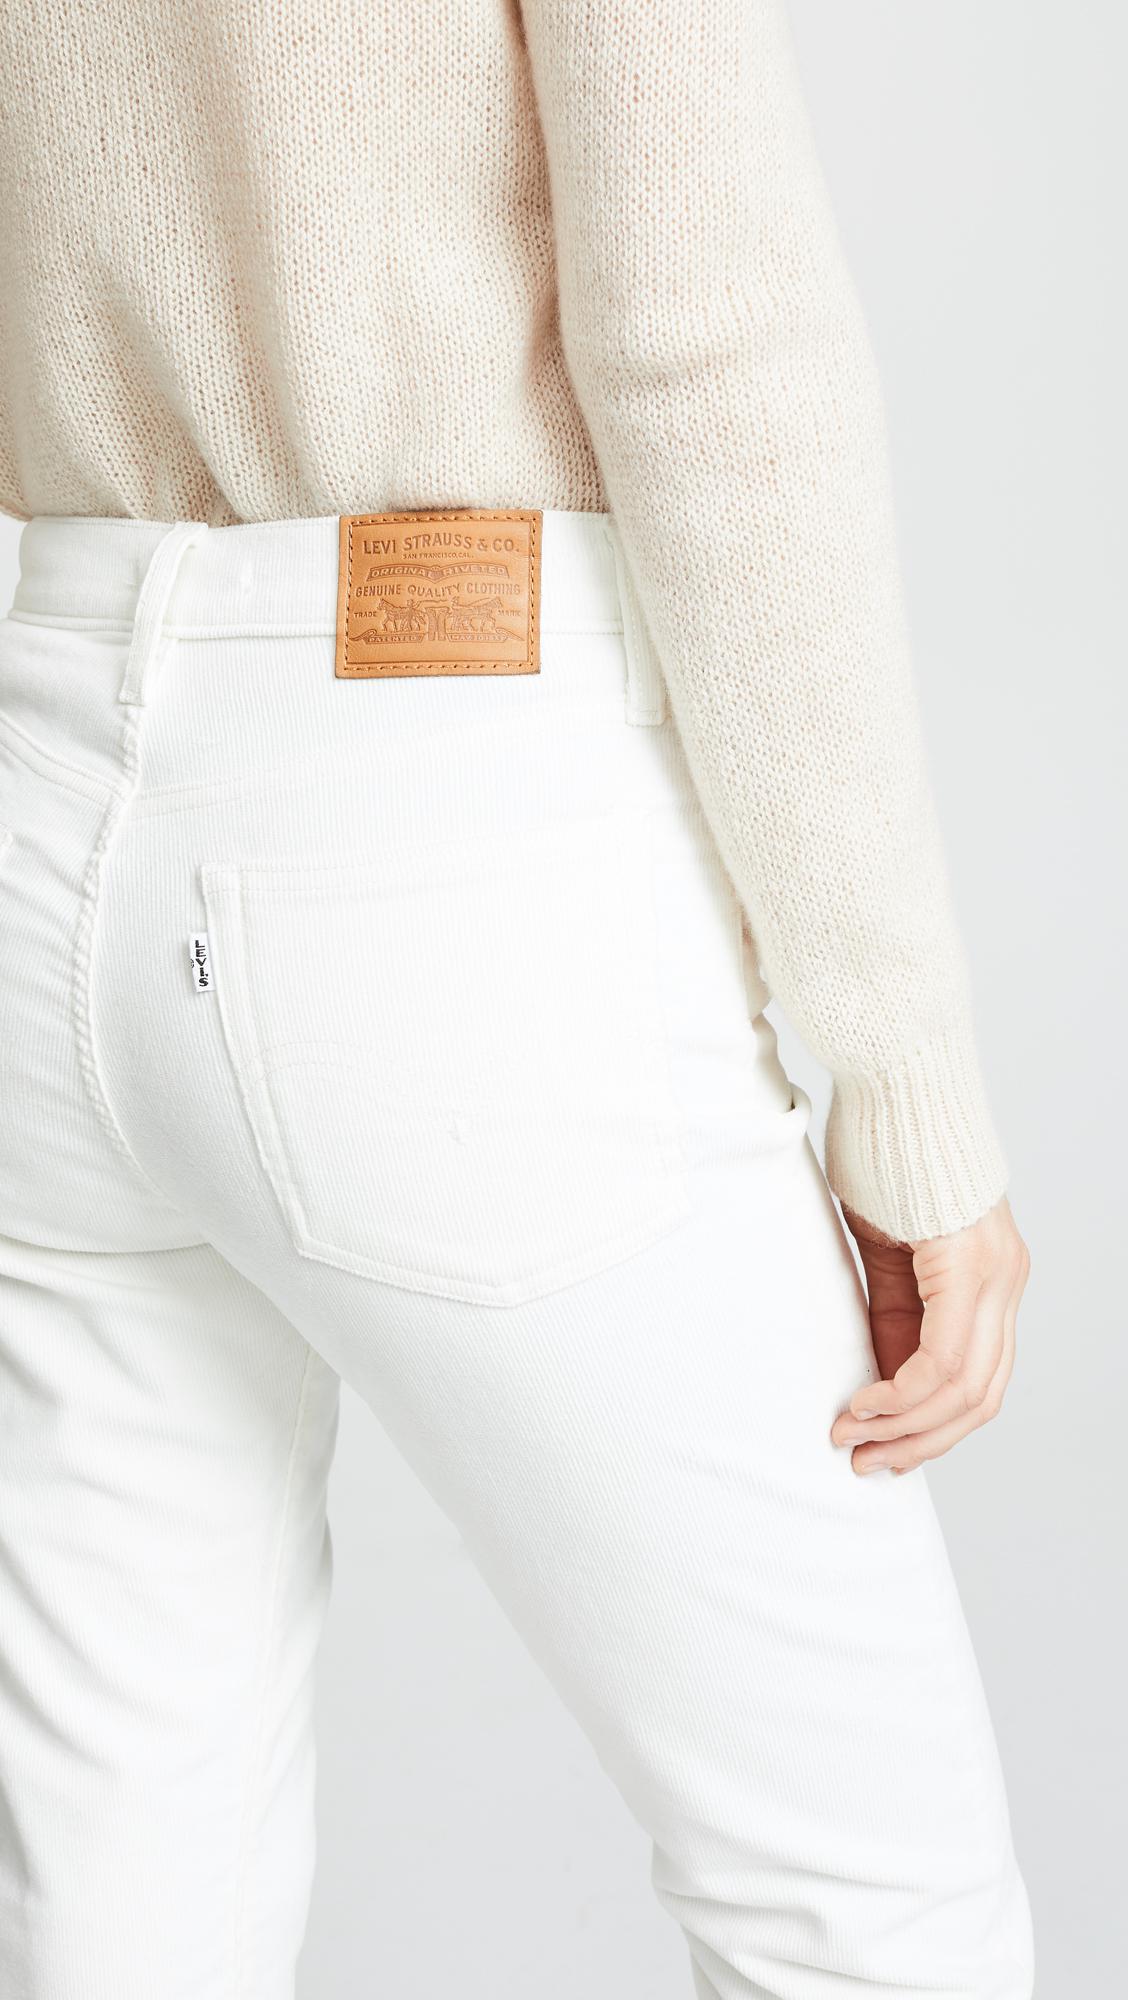 Levi's Wedgie Corduroy Straight Jeans in White - Lyst